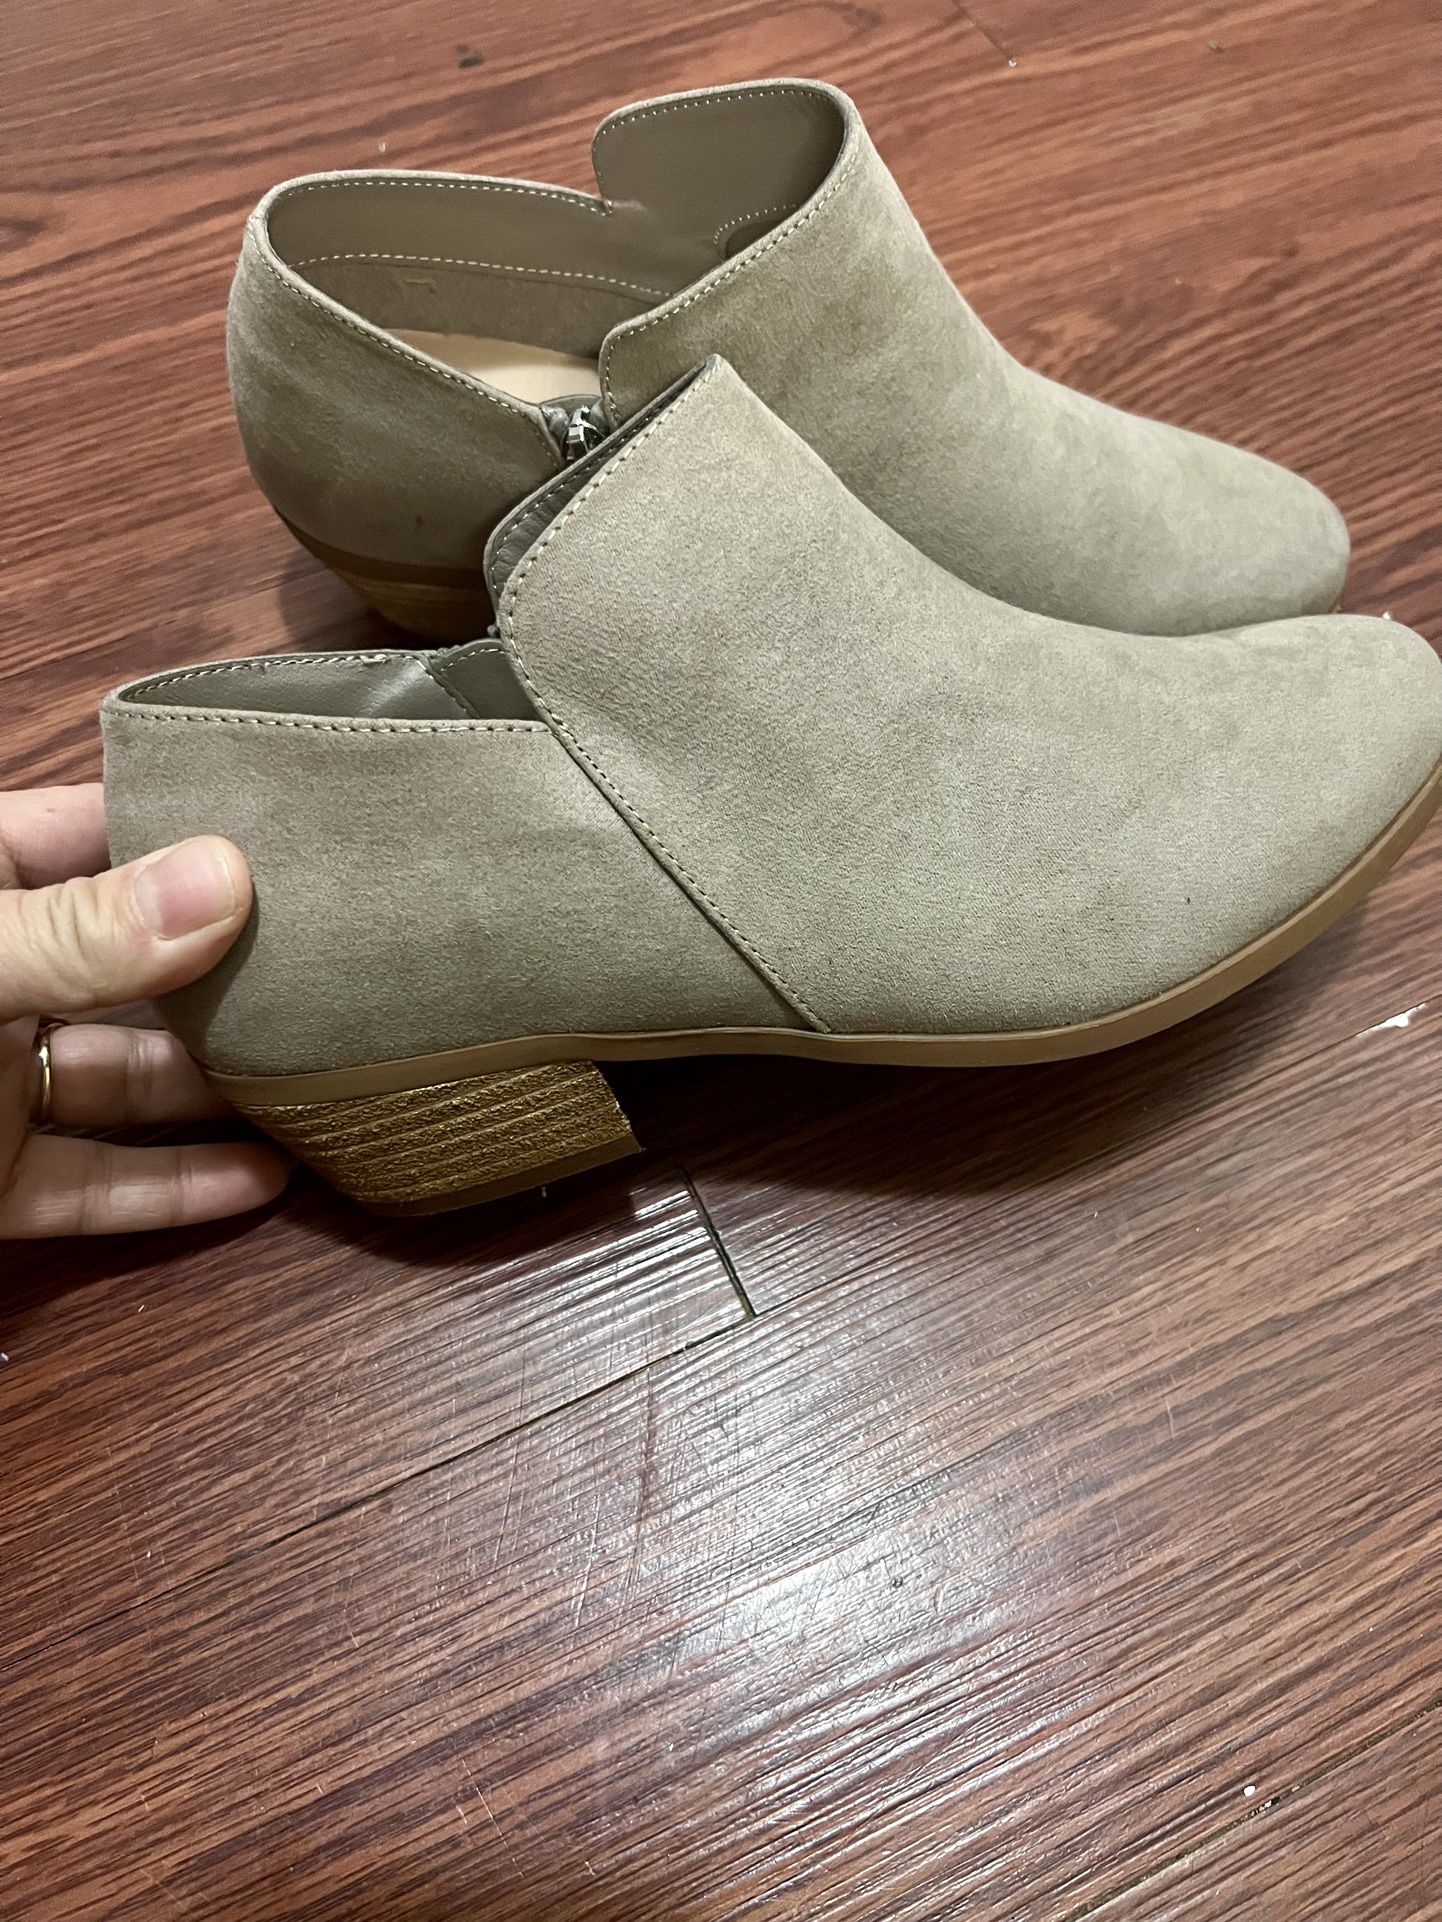 New Women’s Boots Size 8